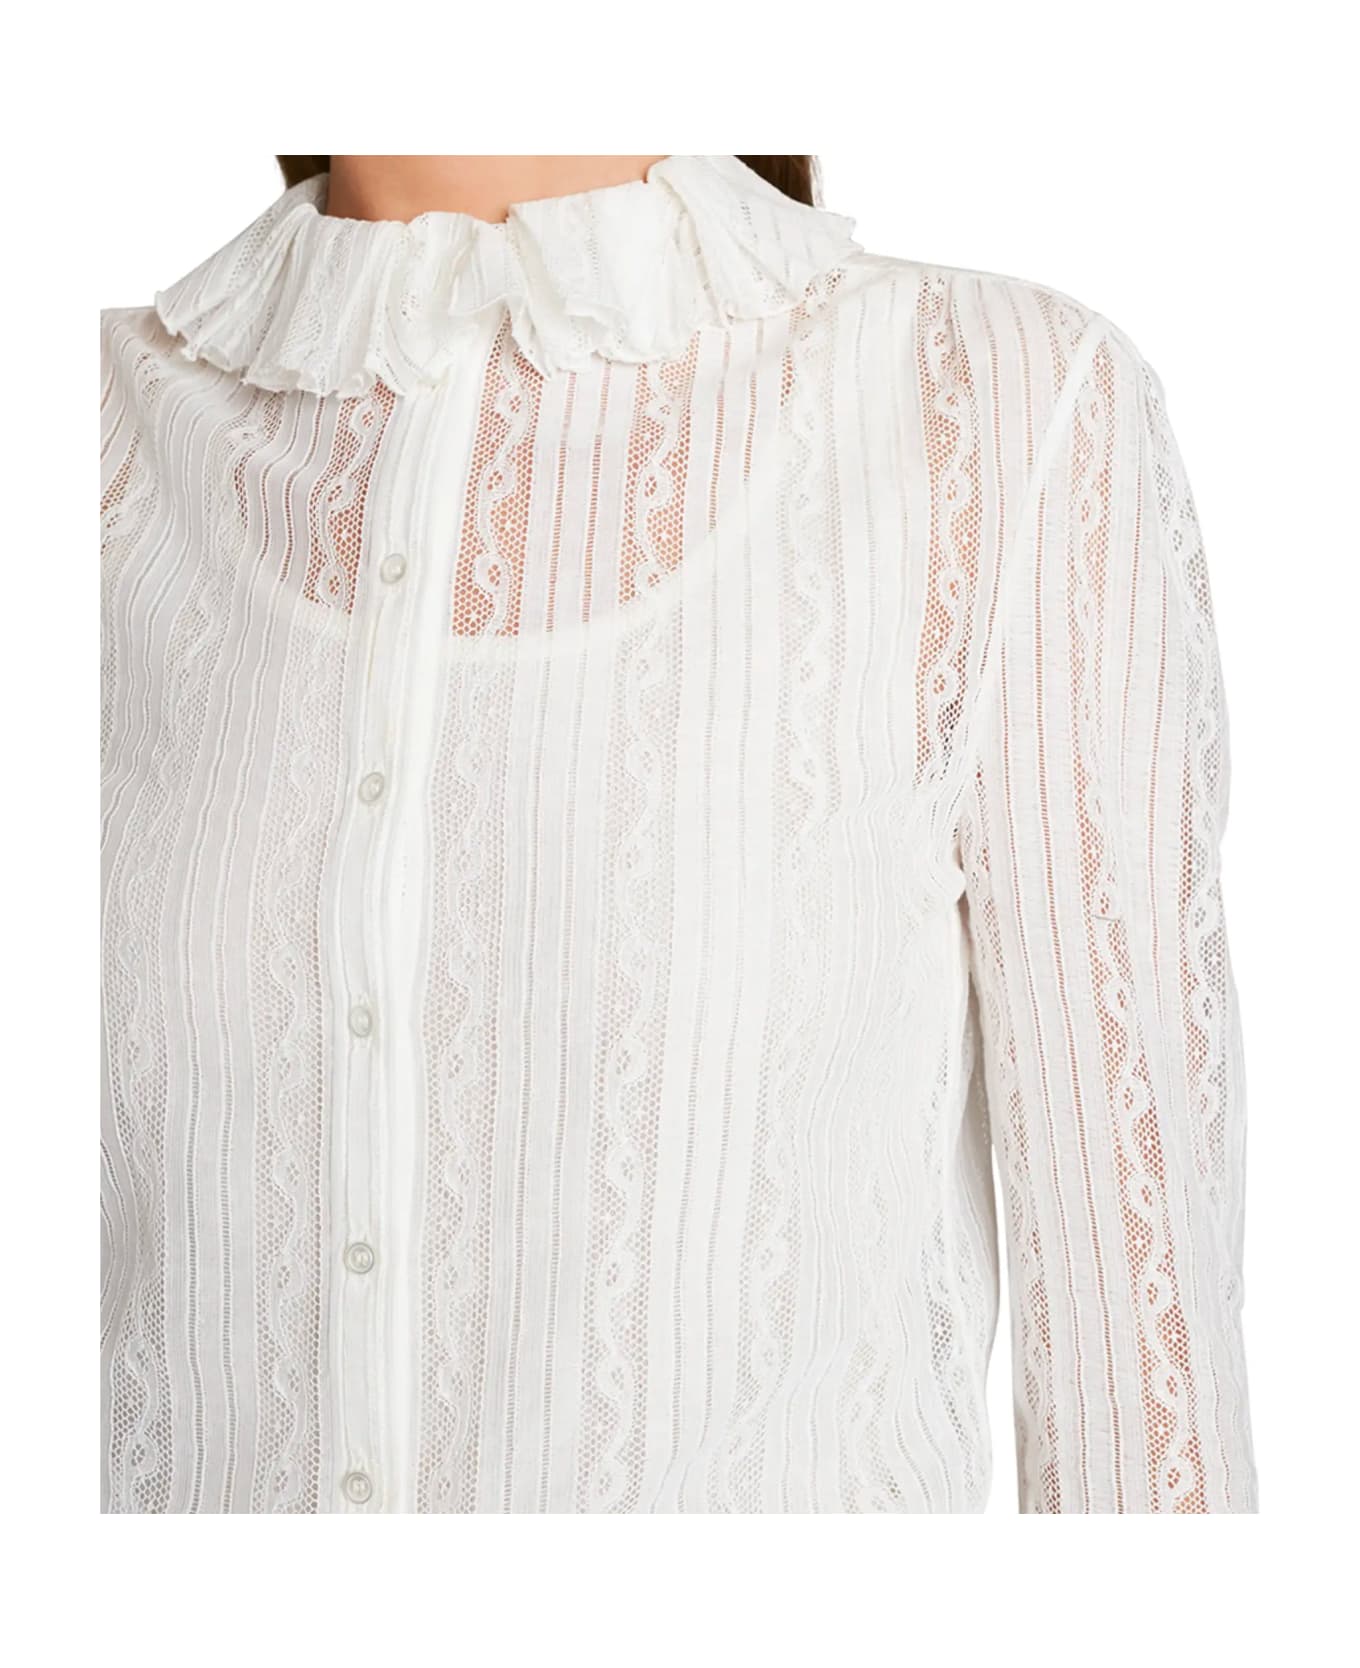 Saint Laurent Embroidered Blouse - White